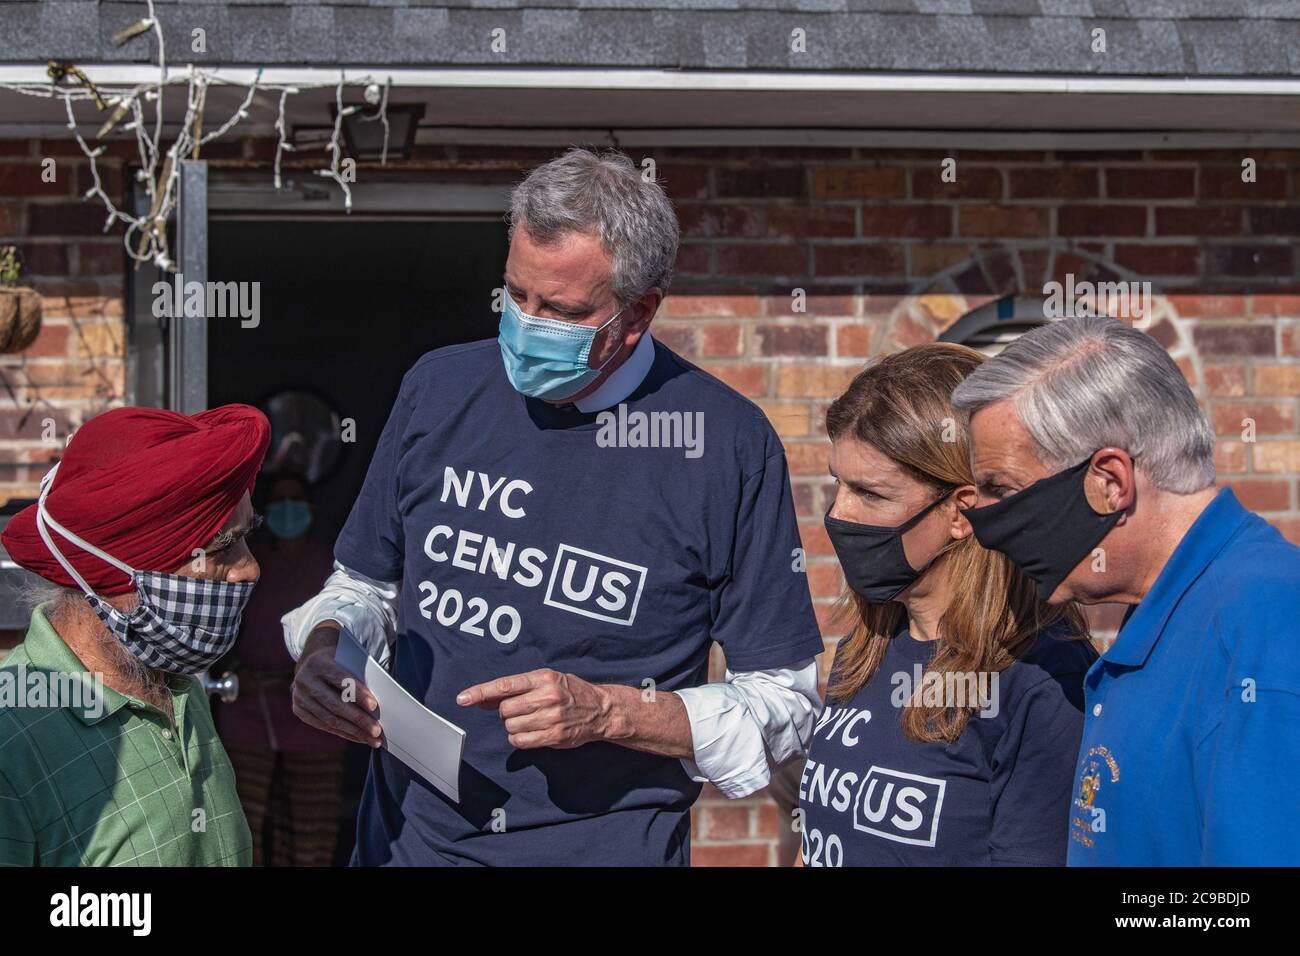 New York, United States. 29th July, 2020. Mayor Bill de Blasio, NYC Census 2020 Director Julie Menin and Assembly Member David Weprin talk to Mr. Singh in Queens borough, New York City.Mayor Bill de Blasio and NYC Census 2020 Director Julie Menin go door-knocking to encourage New Yorkers to complete the census in South Richmond Hill, Queens. Credit: SOPA Images Limited/Alamy Live News Stock Photo